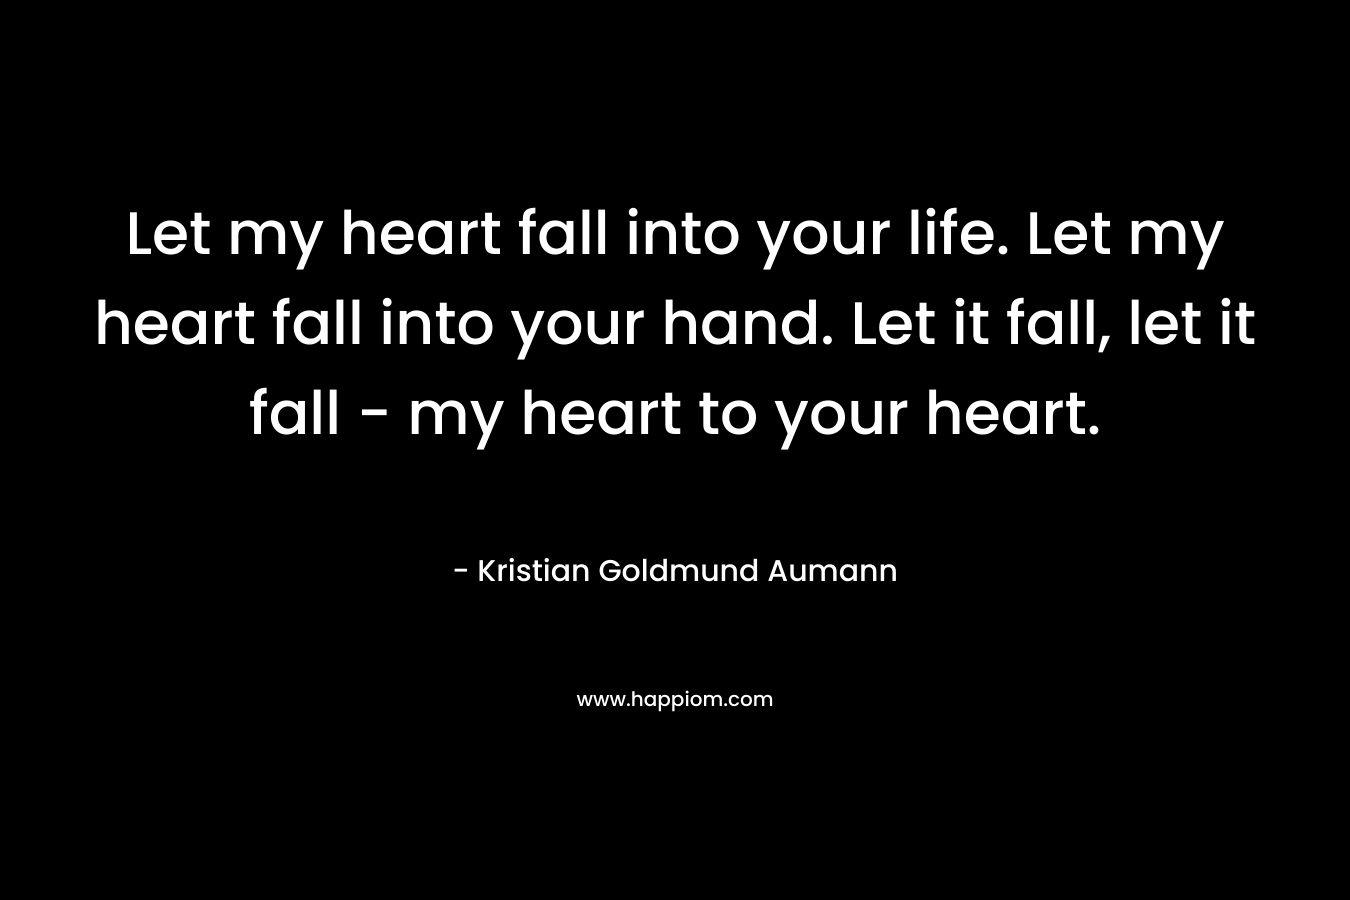 Let my heart fall into your life. Let my heart fall into your hand. Let it fall, let it fall - my heart to your heart.